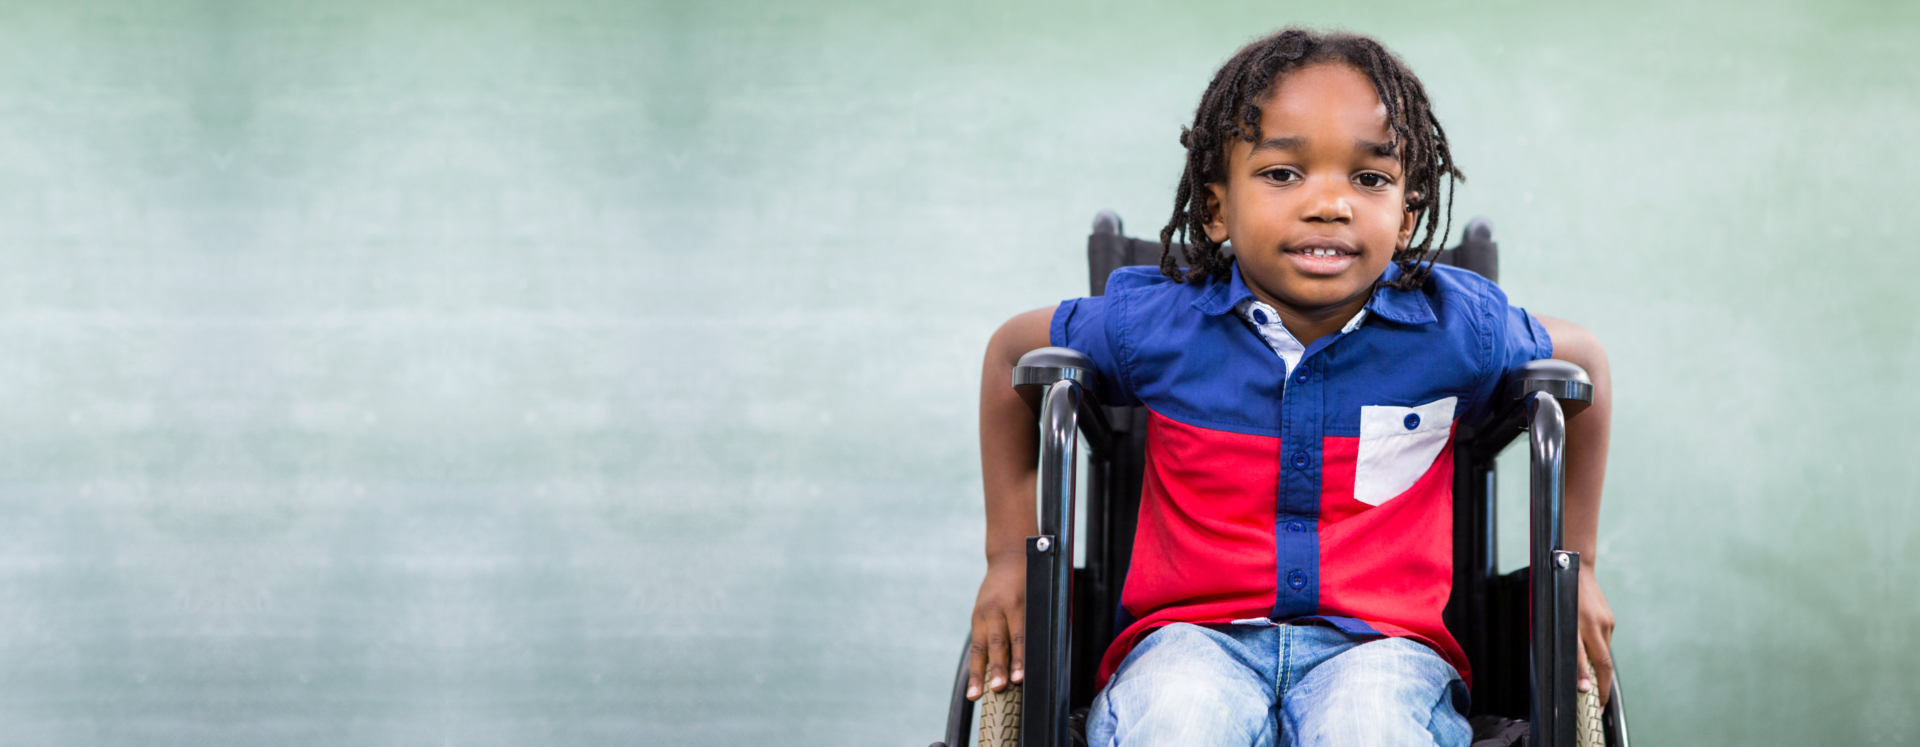 Portrait of handicapped boy in classroom